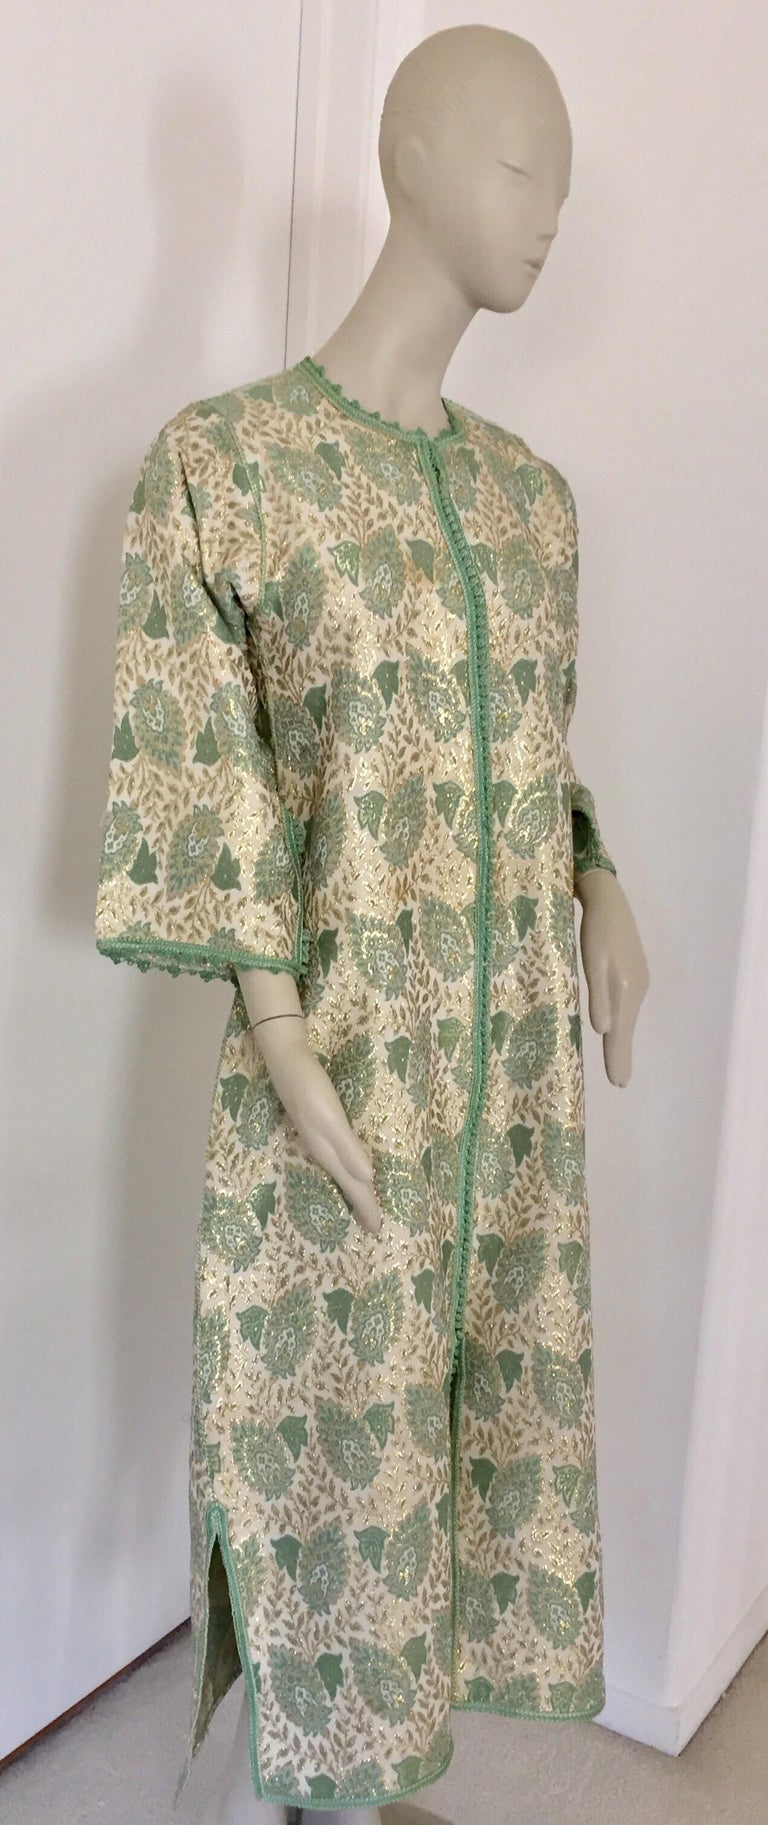 Embroidered Elegant Moroccan Caftan Lime Green and Silver and Gold Metallic Floral Brocade For Sale